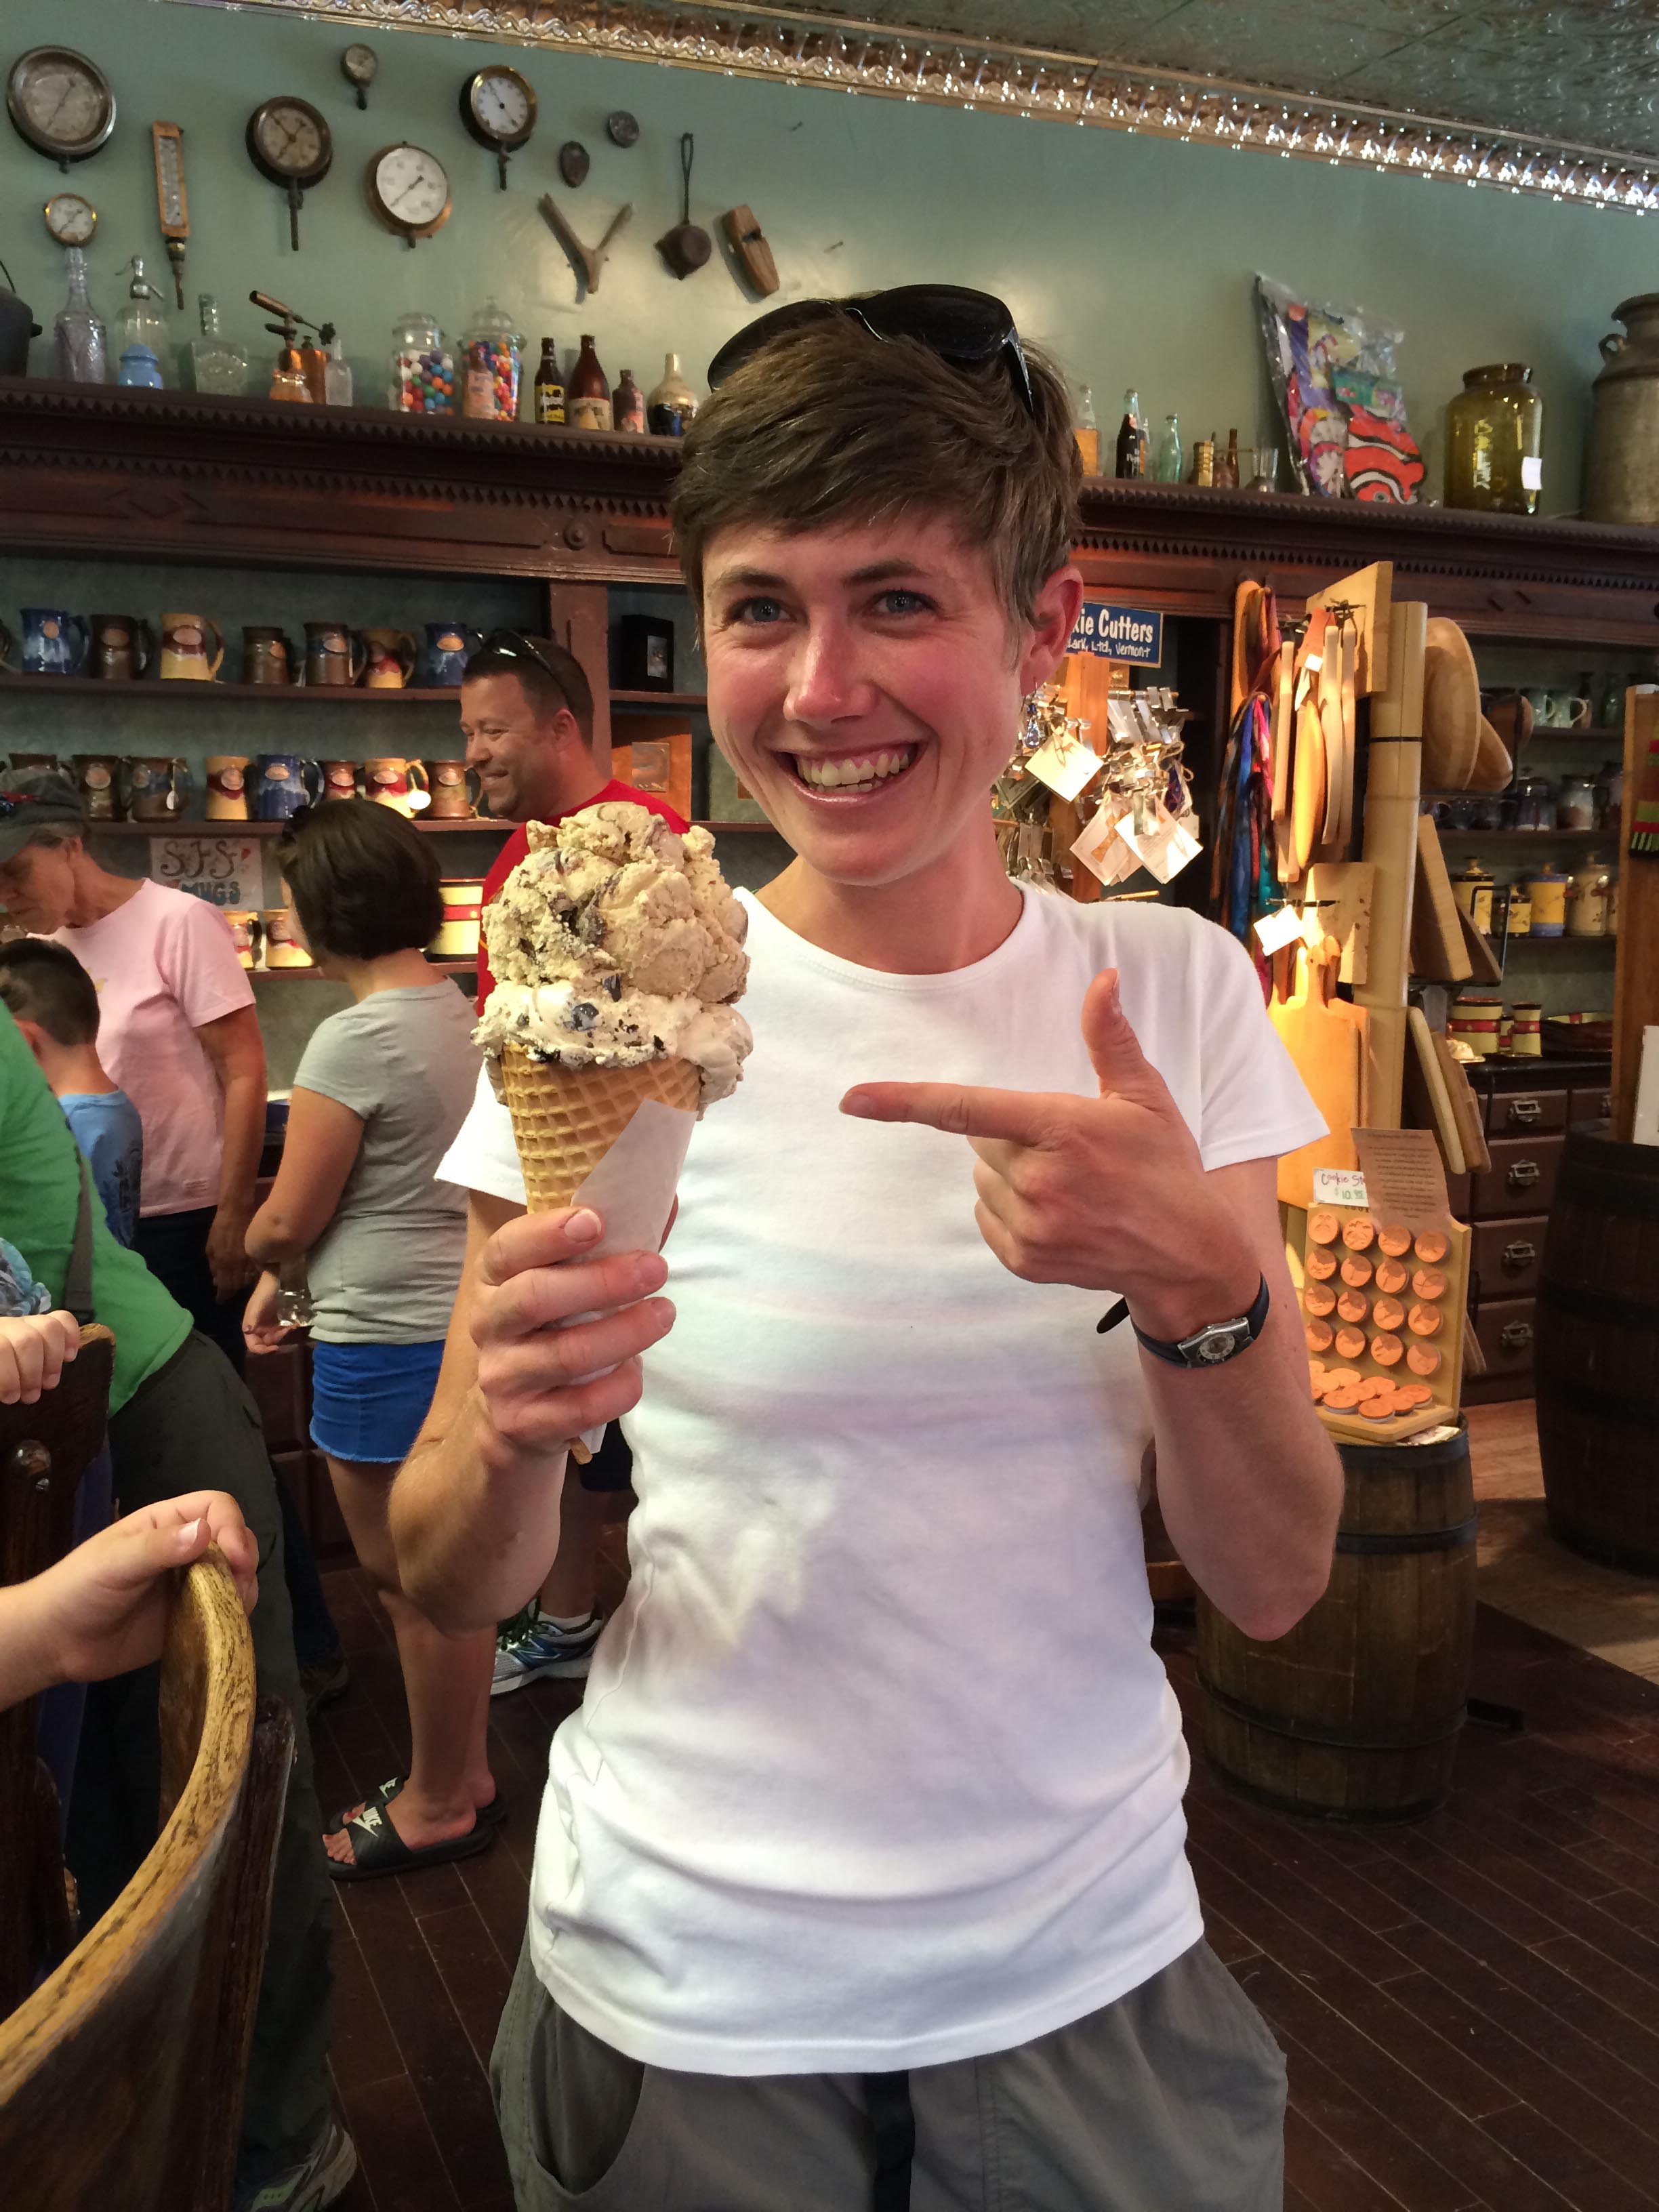  Upon arriving in towns, ice cream was always a priority. PHOTO COURTESY WILLOW BELDEN 